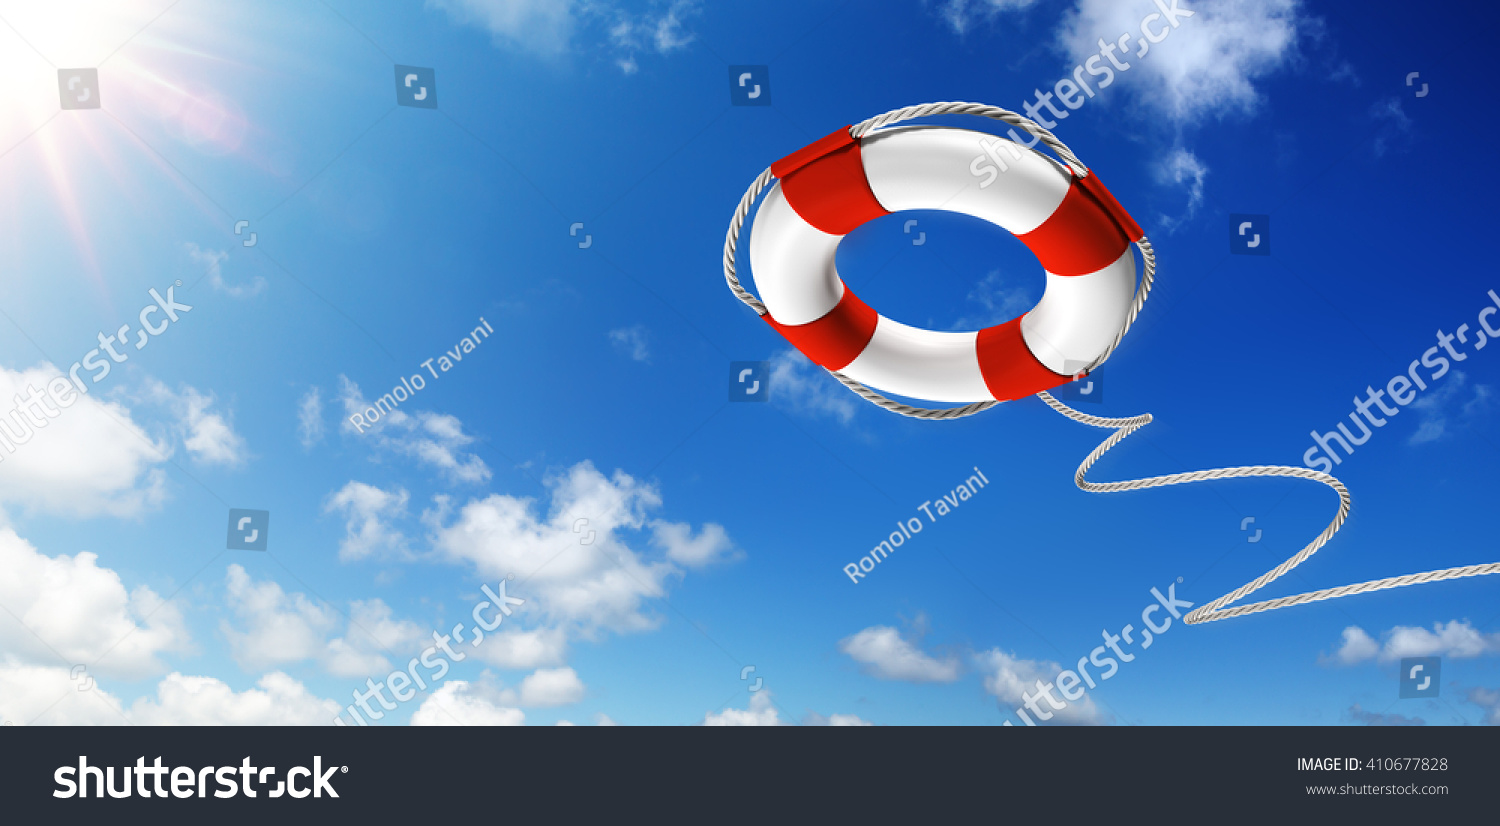 438 Throwing lifebuoy Stock Photos, Images & Photography | Shutterstock